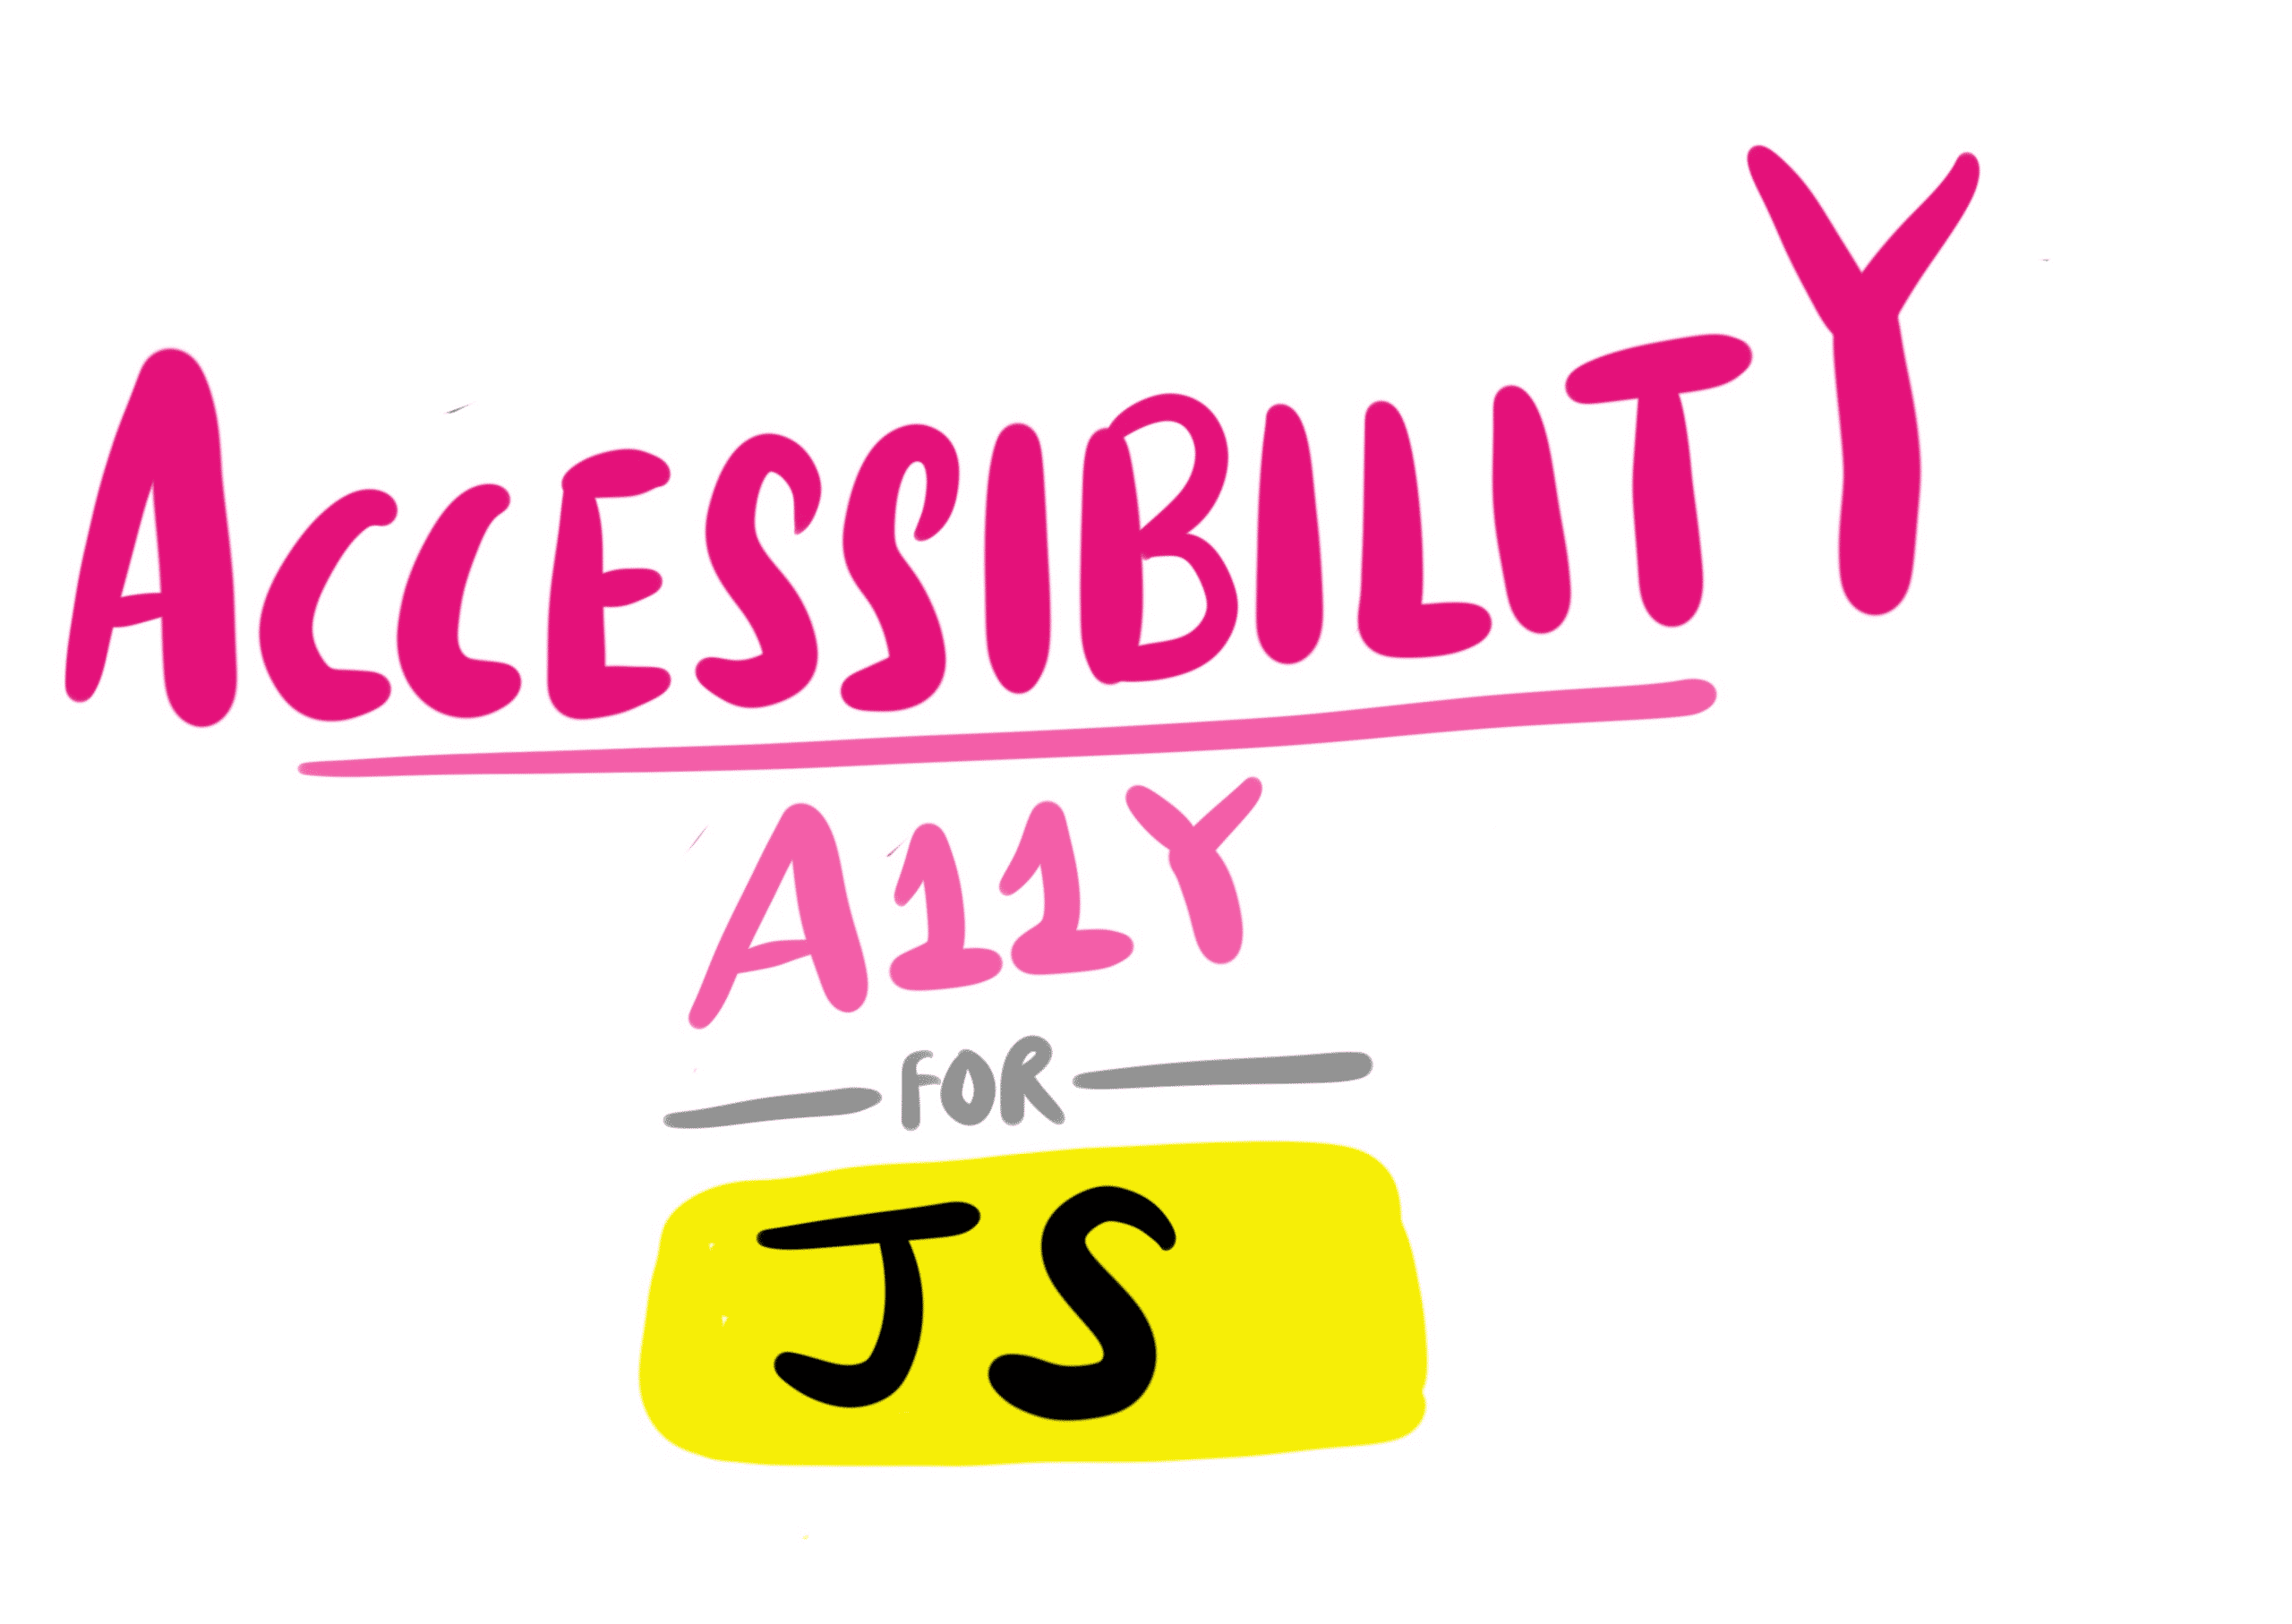 Accessibility For JS Apps